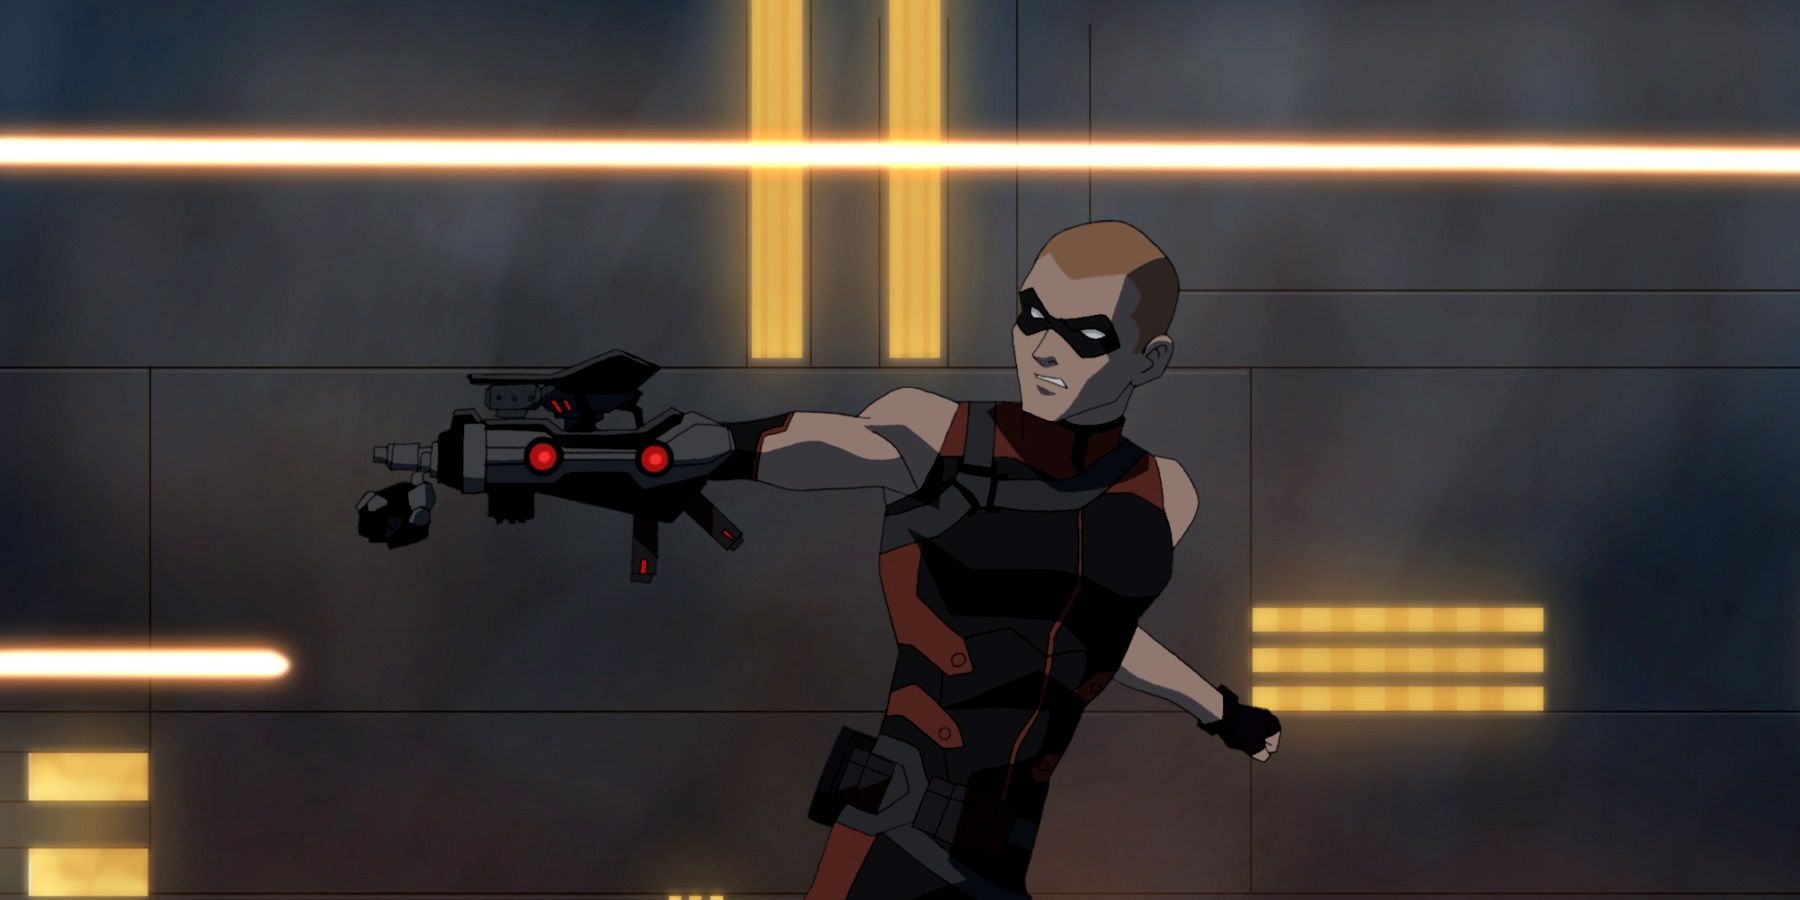 Arsenal using his cyber arm in Young Justice